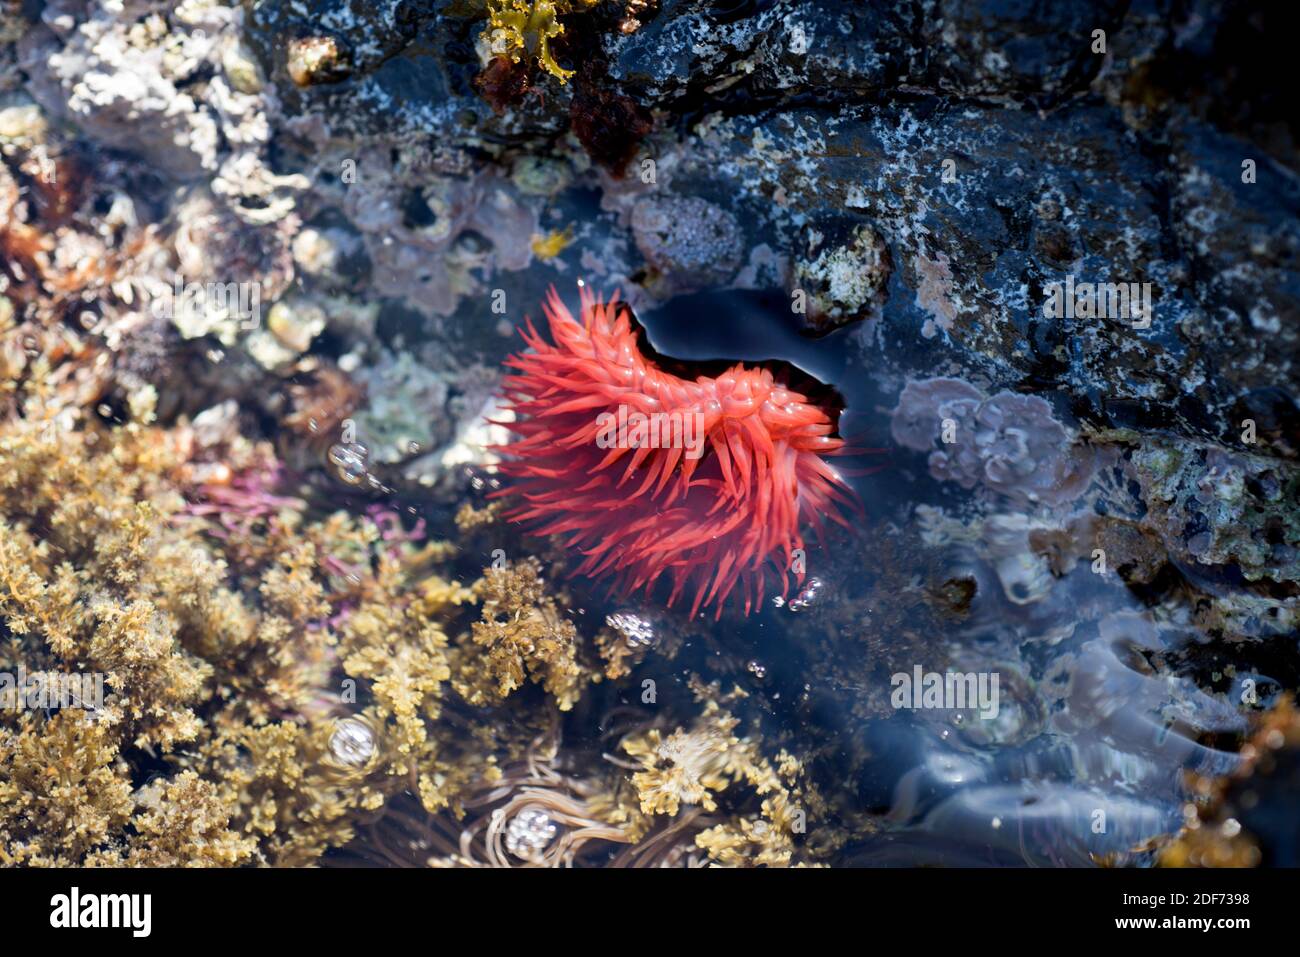 Beadlet anemone (Actinia equina) with the stinging tentacles extended. This photo was taken in Cap de Creus, Girona province, Catalonia, Spain. Stock Photo